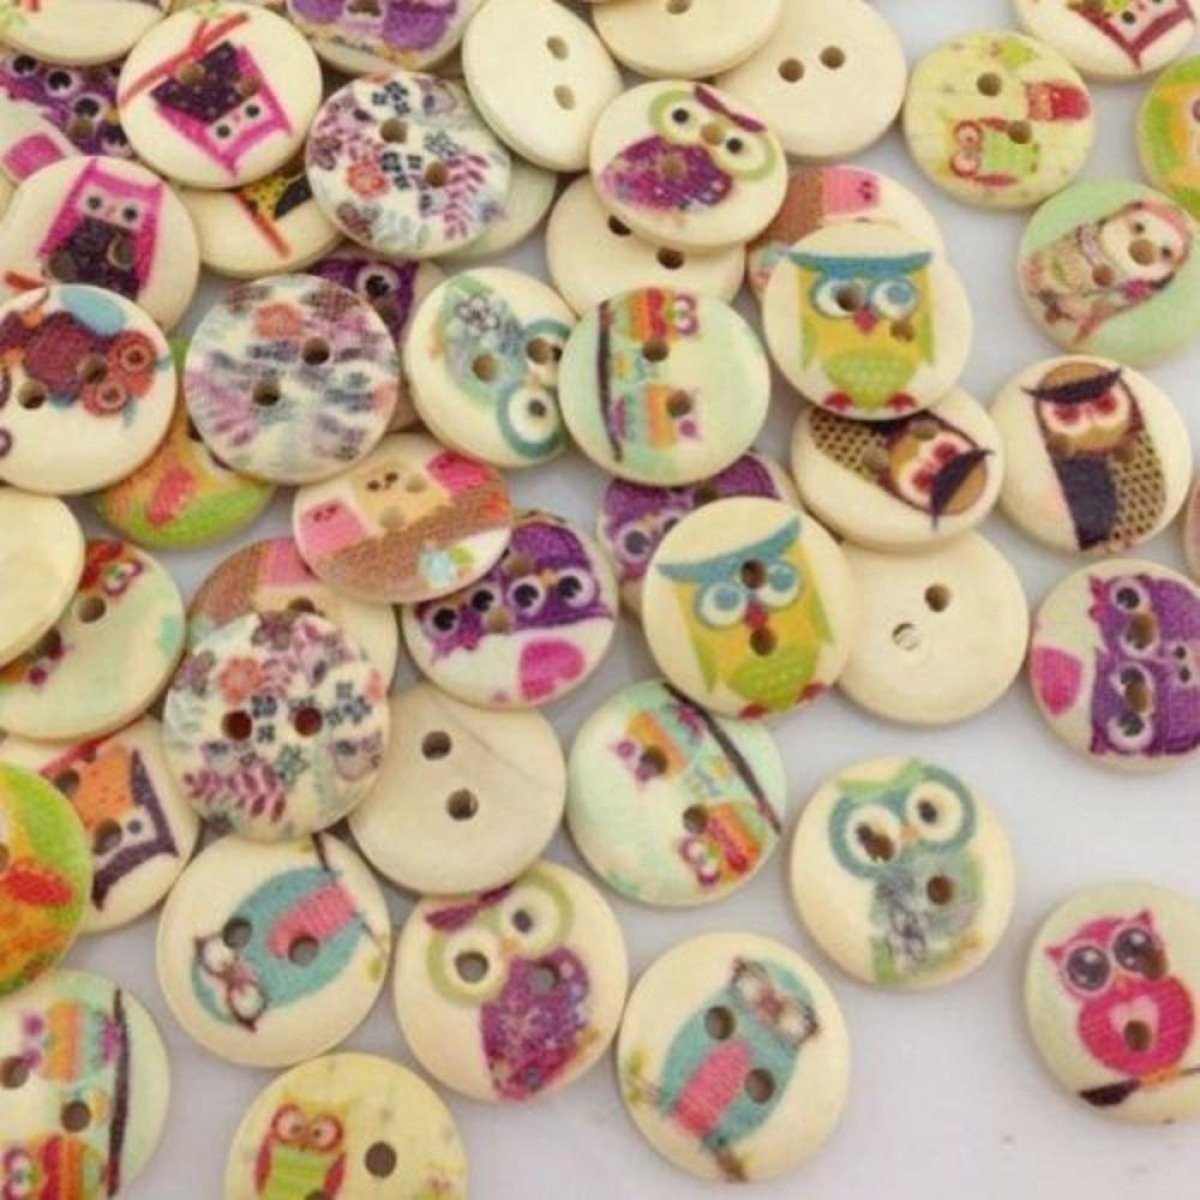 100pcs Mixed Wooden Buttons Flower for Clothing Craft Sewing DIY 2 Hole 15mm - Owls 2 - - Asia Sell